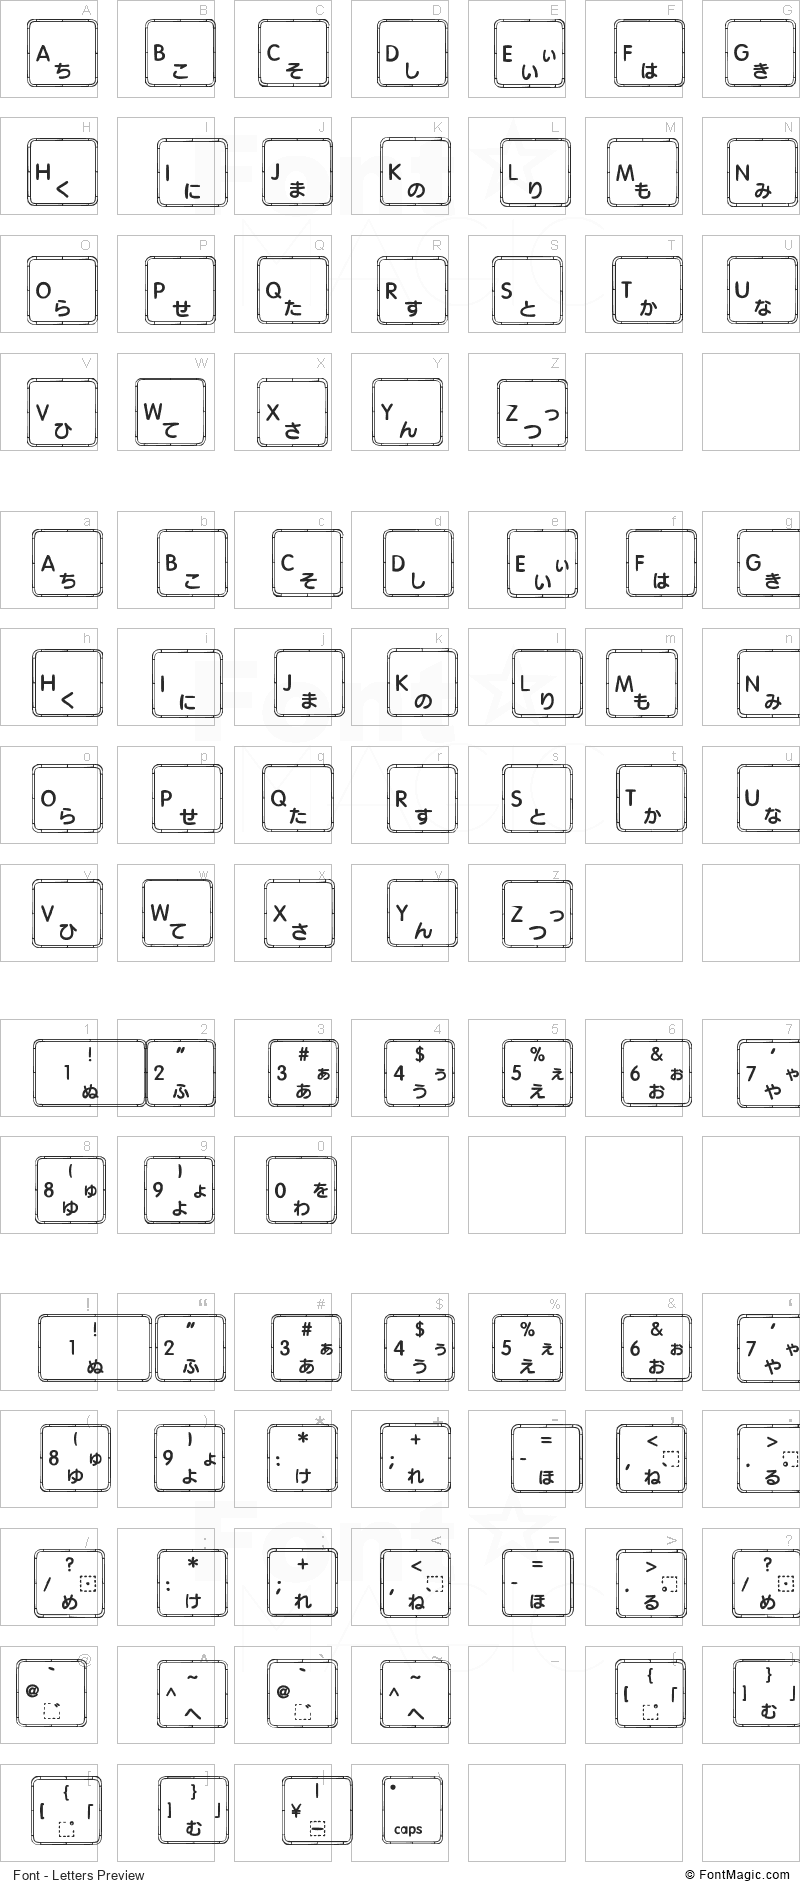 Apple Japanese Keyboard Font - All Latters Preview Chart